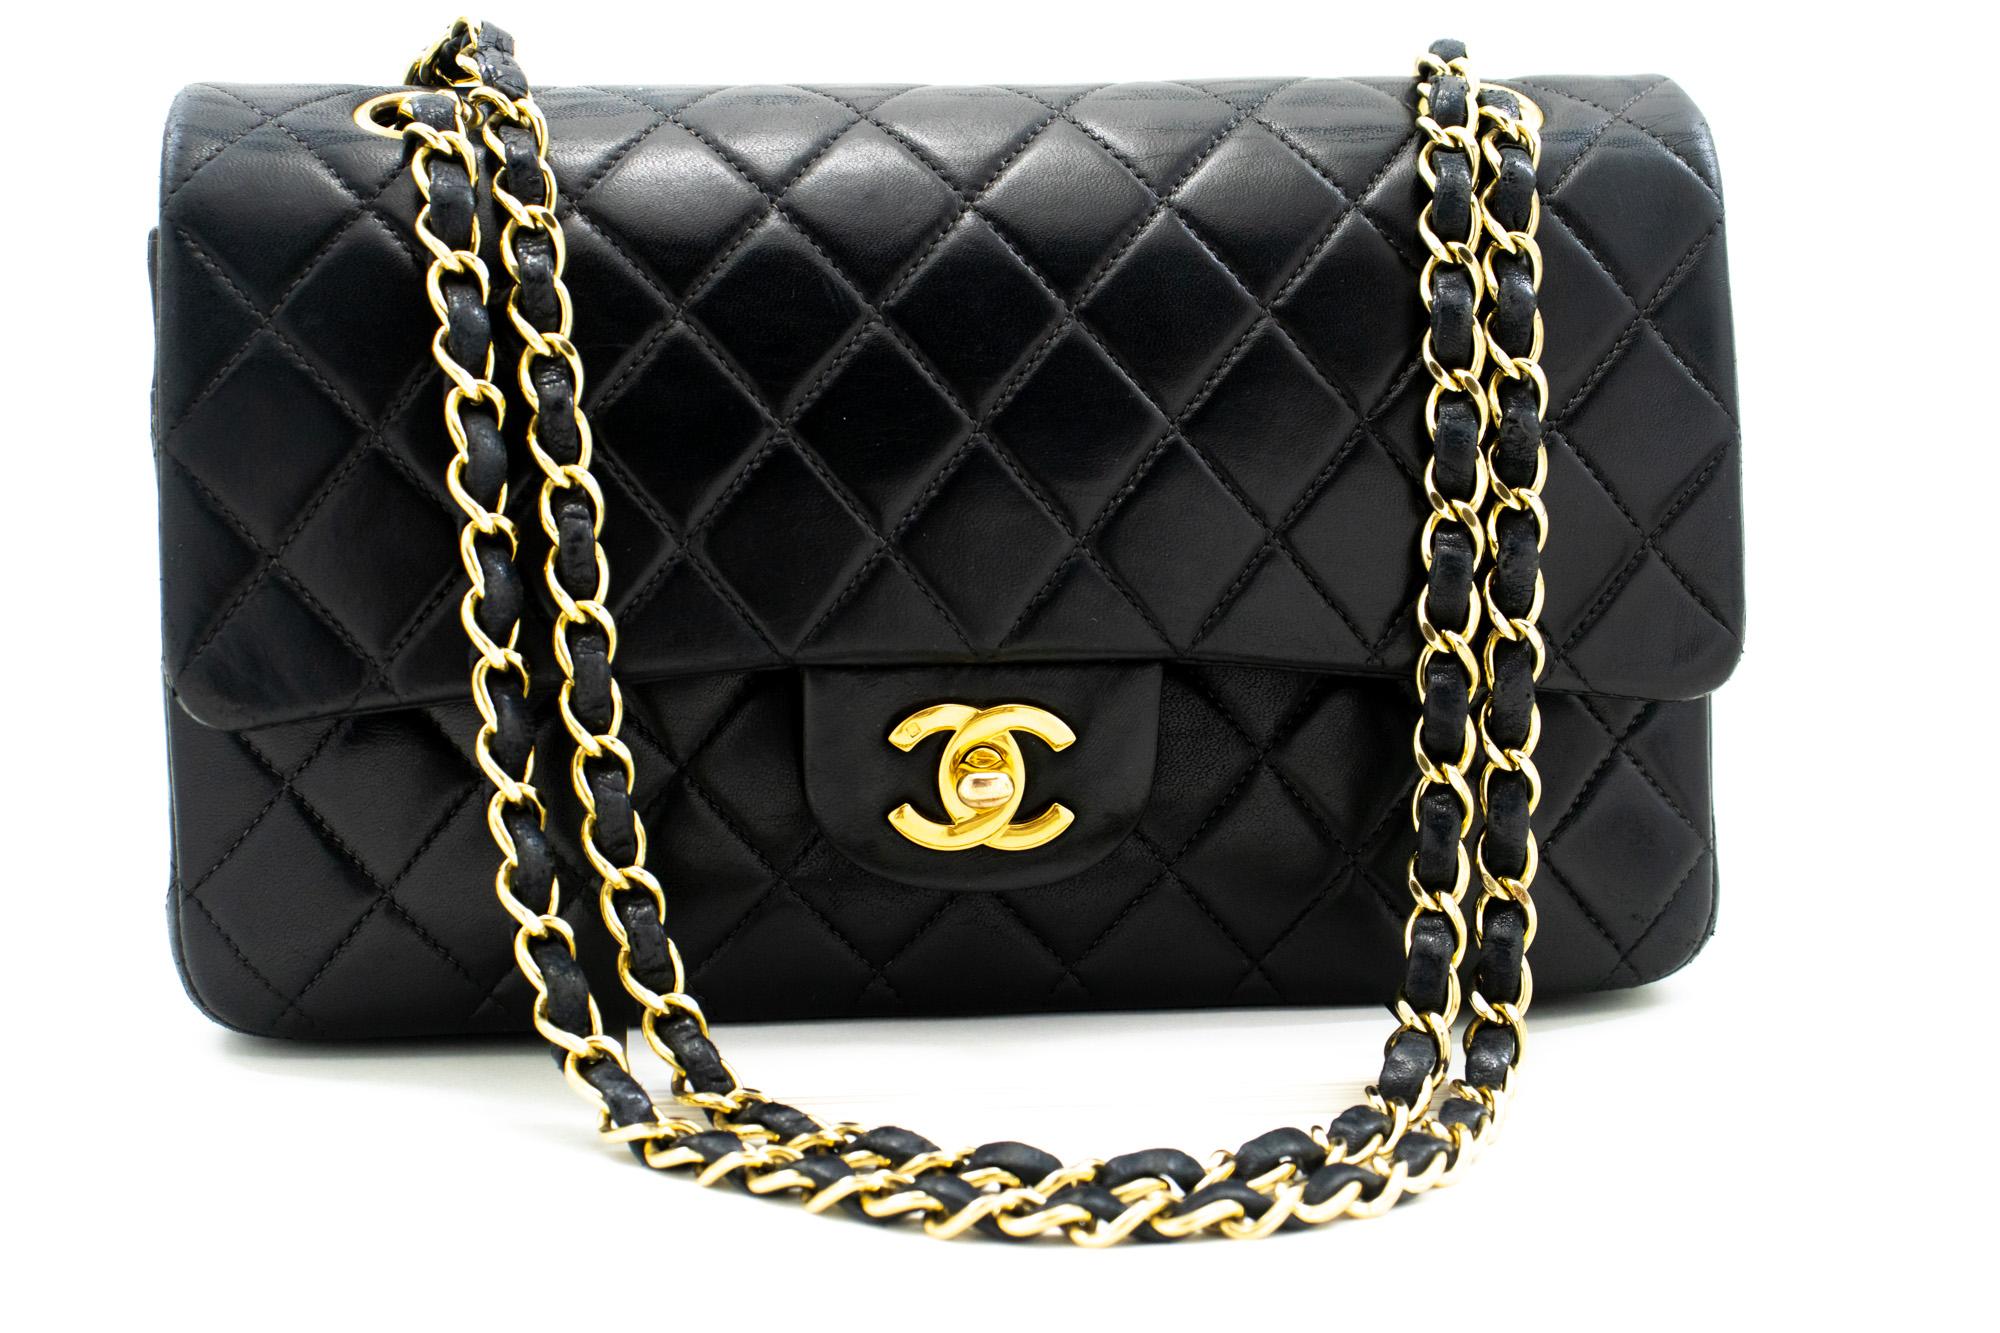 An authentic CHANEL Classic Double Flap Medium Chain Shoulder Bag Black Lamb. The color is Black. The outside material is Leather. The pattern is Solid. This item is Vintage / Classic. The year of manufacture would be 2000-2 0 0 2 .
Conditions &